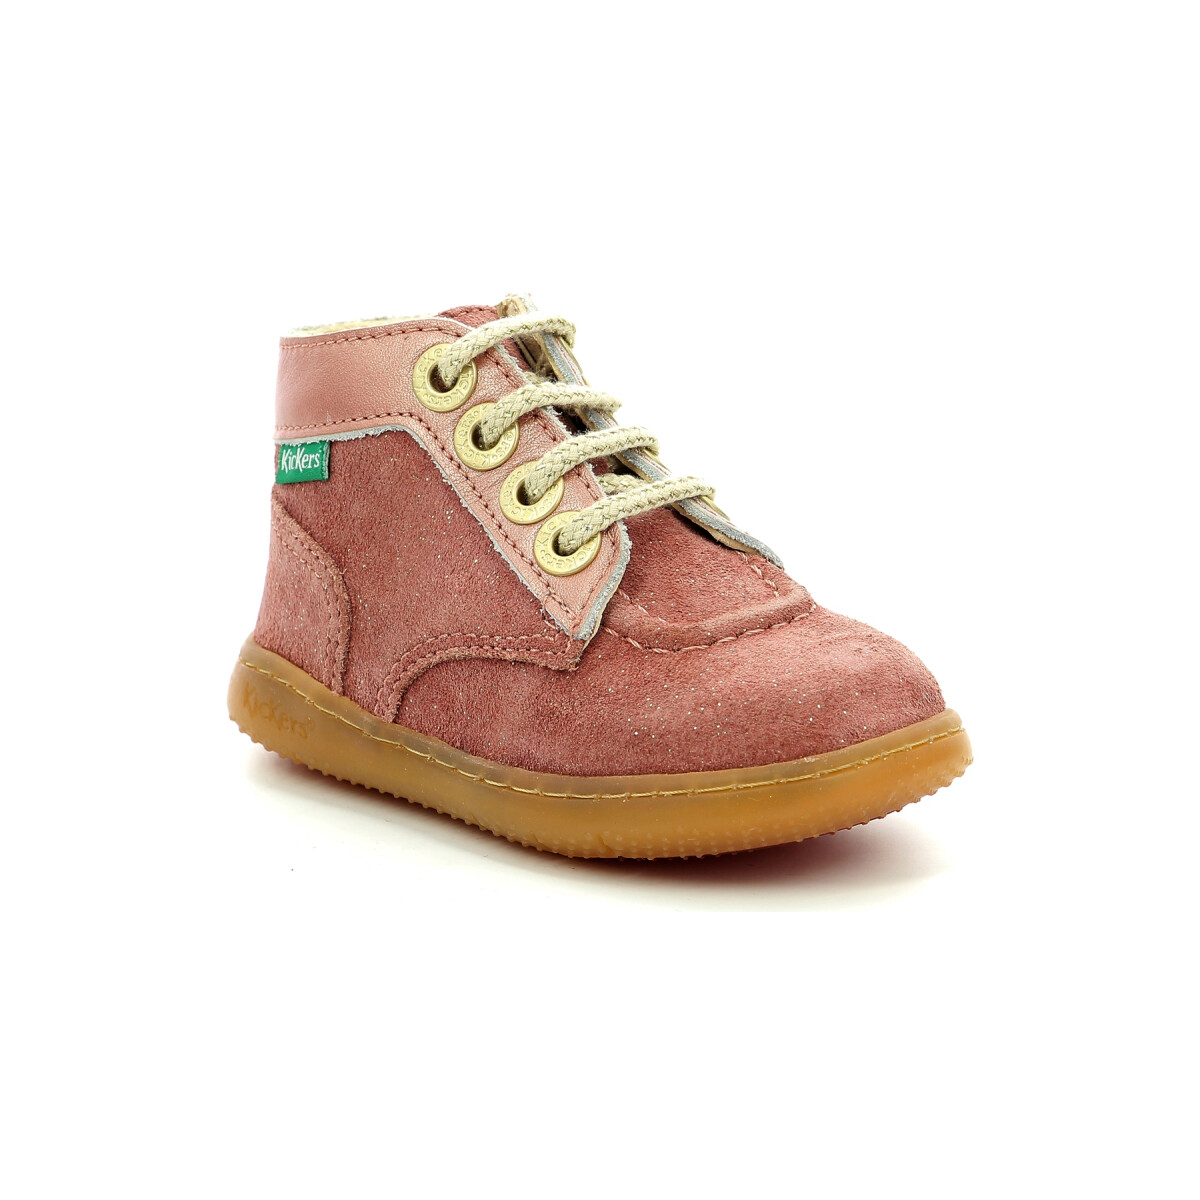 Chaussures Fille Boots Kickers Kickbonzip Rose